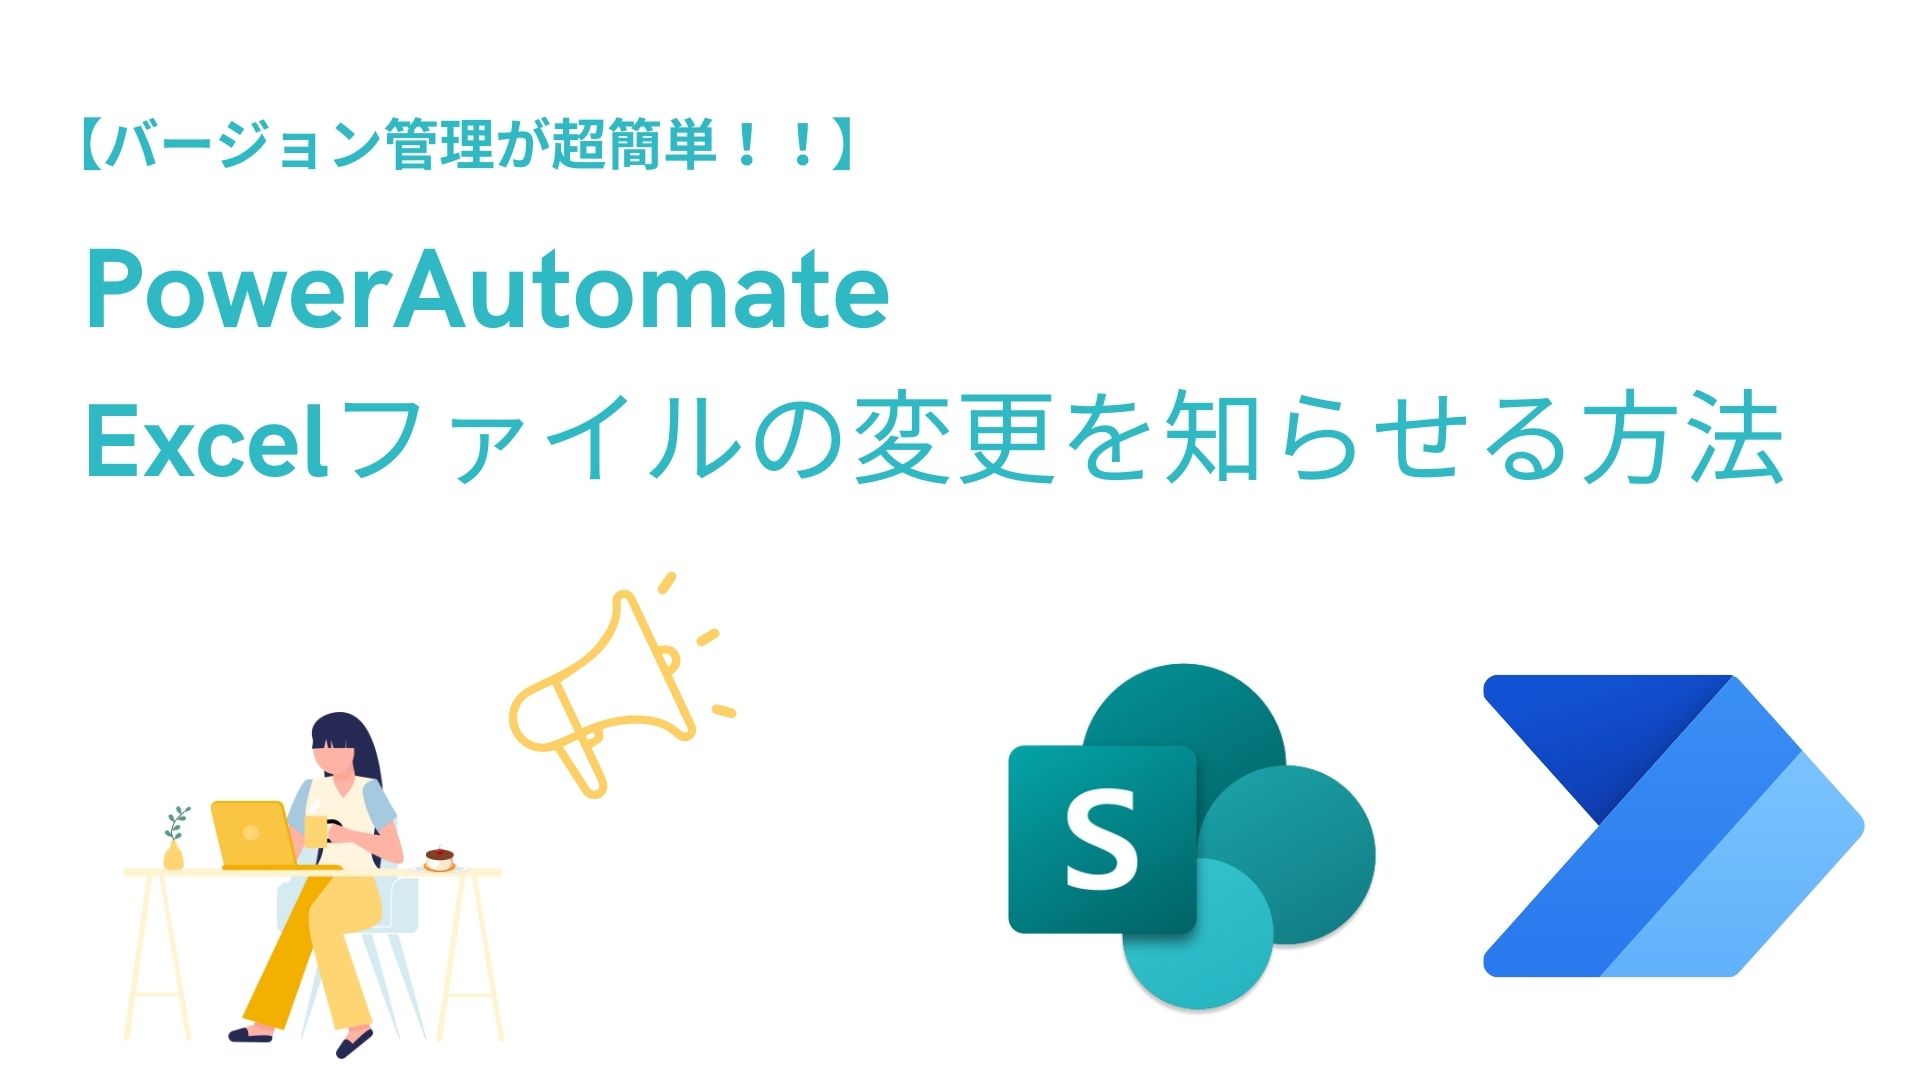 【PowerAutomate】Excelファイルの更新を検知する方法